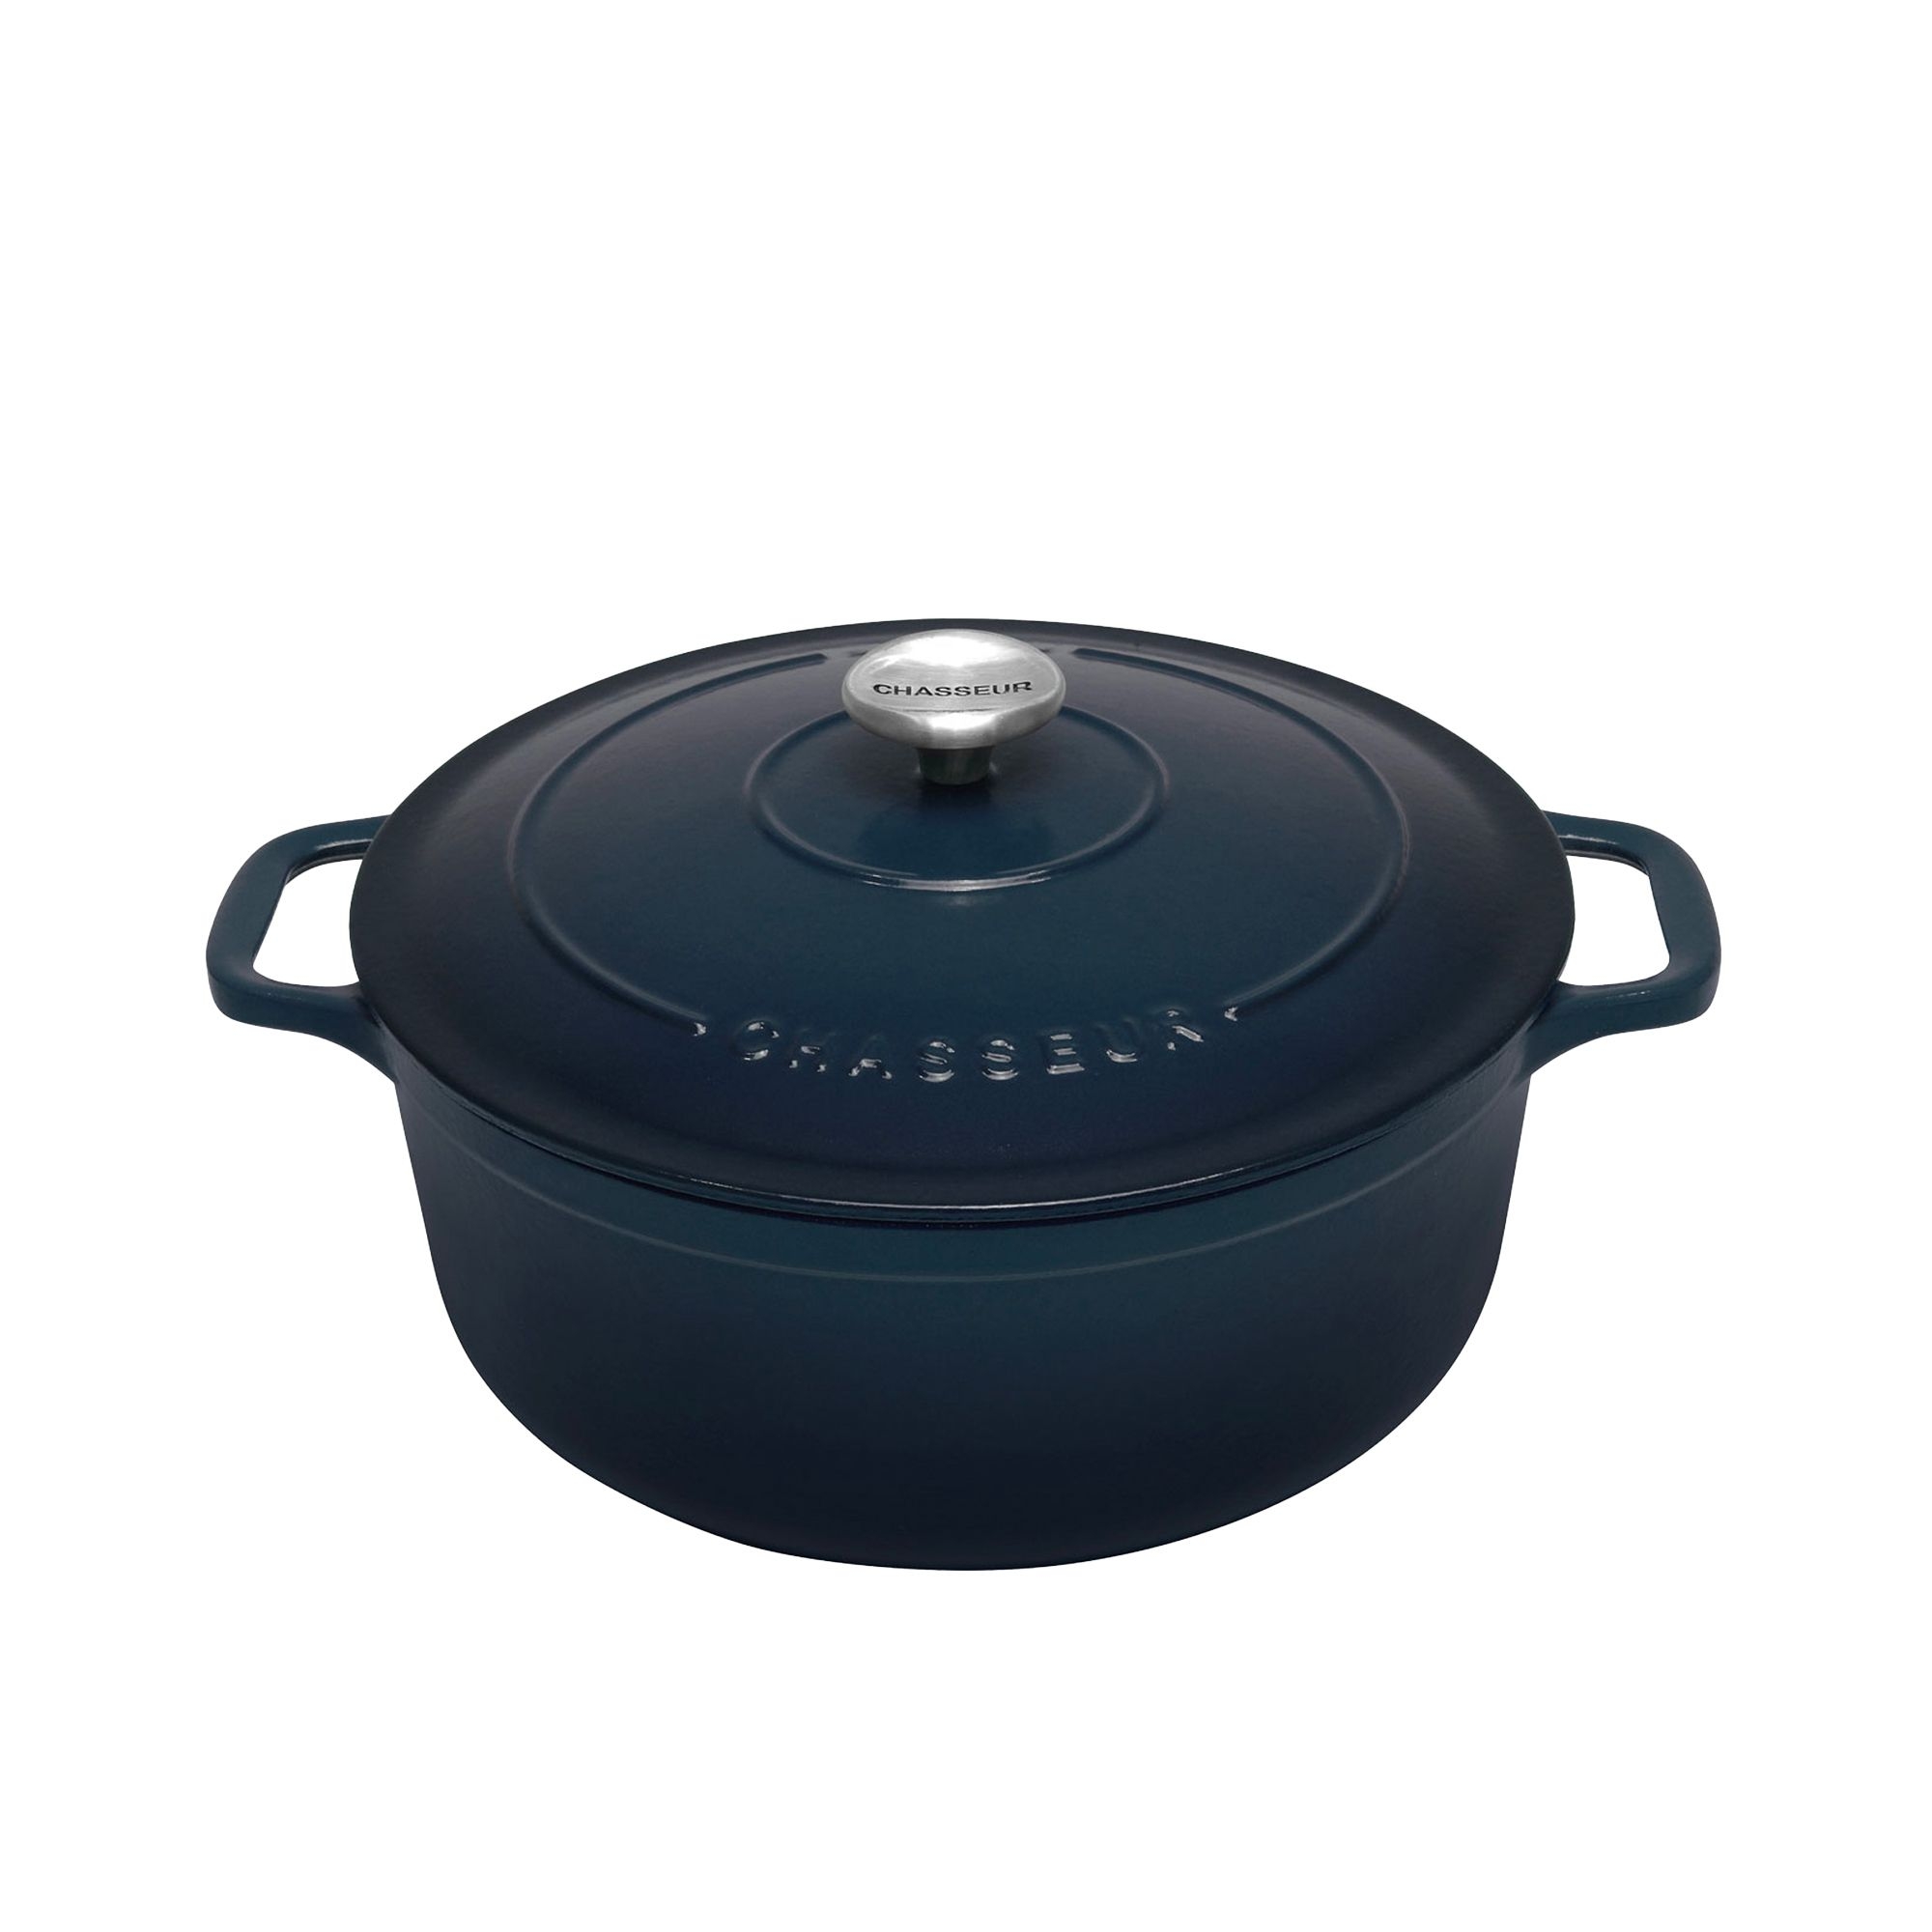 Chasseur Round French Oven 28cm - 6.1L Liquorice Blue Image 1